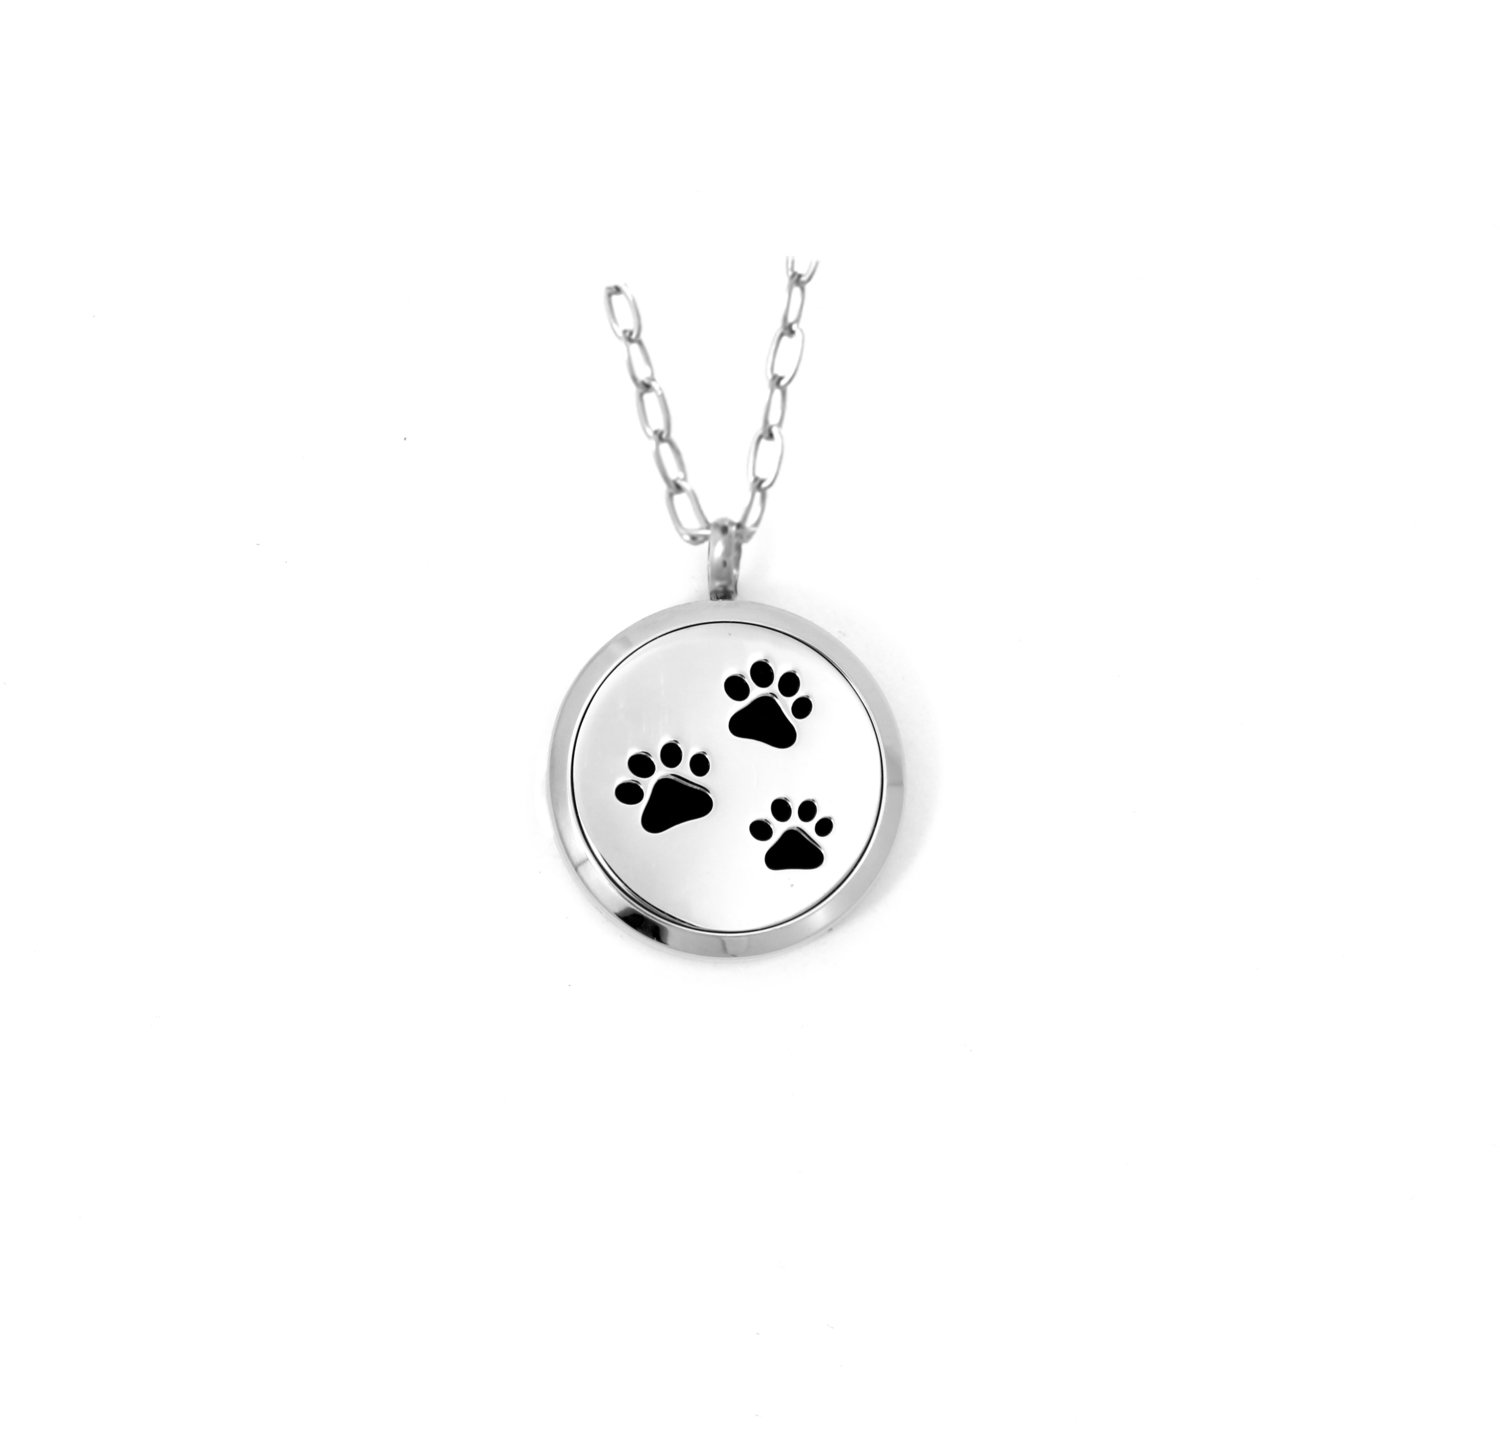 Diffusing Magnetic Paws Pendant - includes Two Leather Inserts